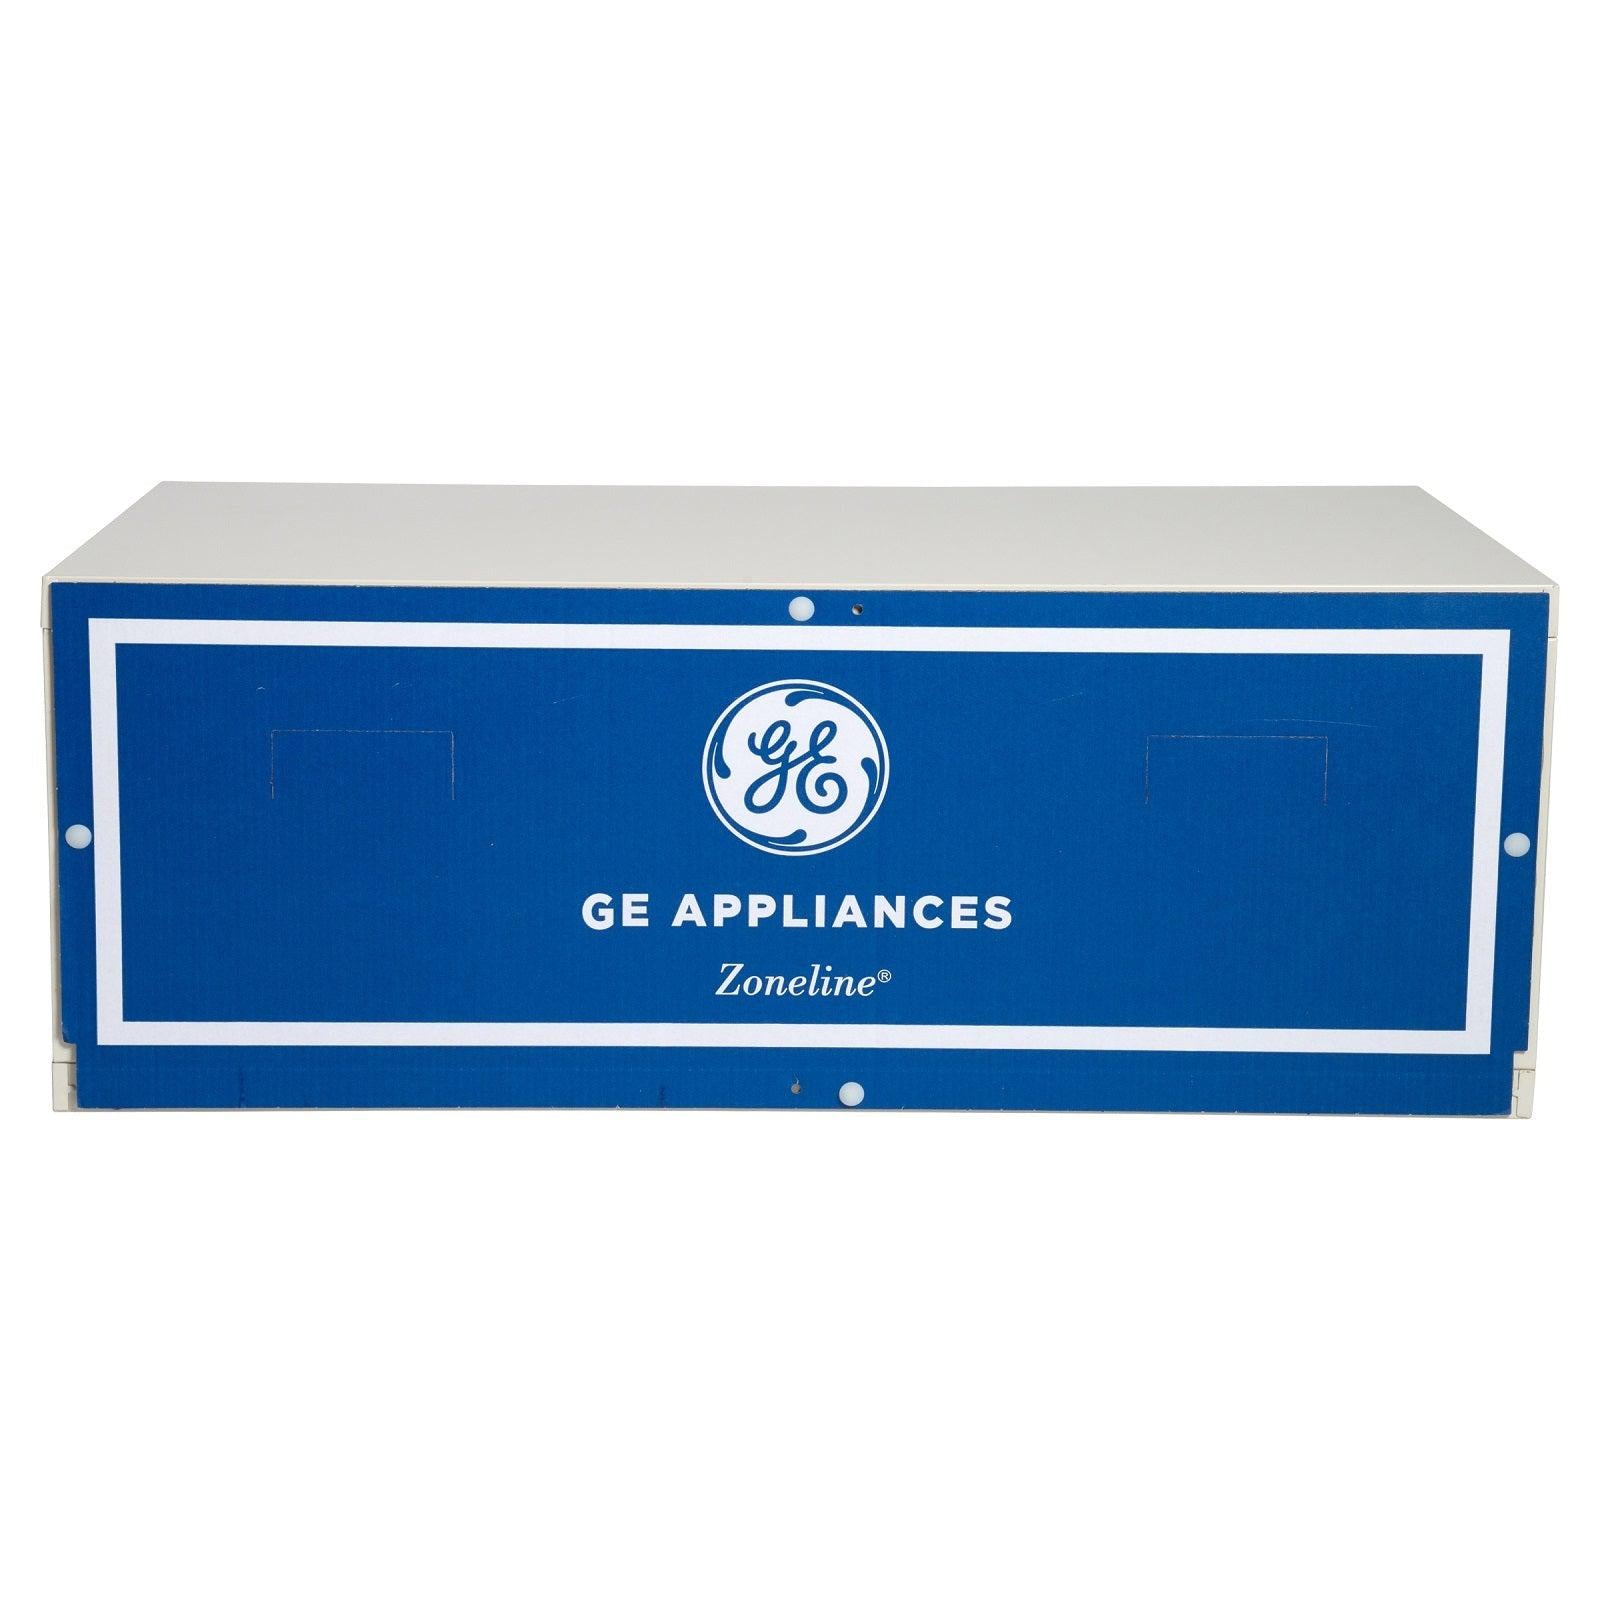 GE Quick Snap Wall Sleeve, 16' Extend Depth